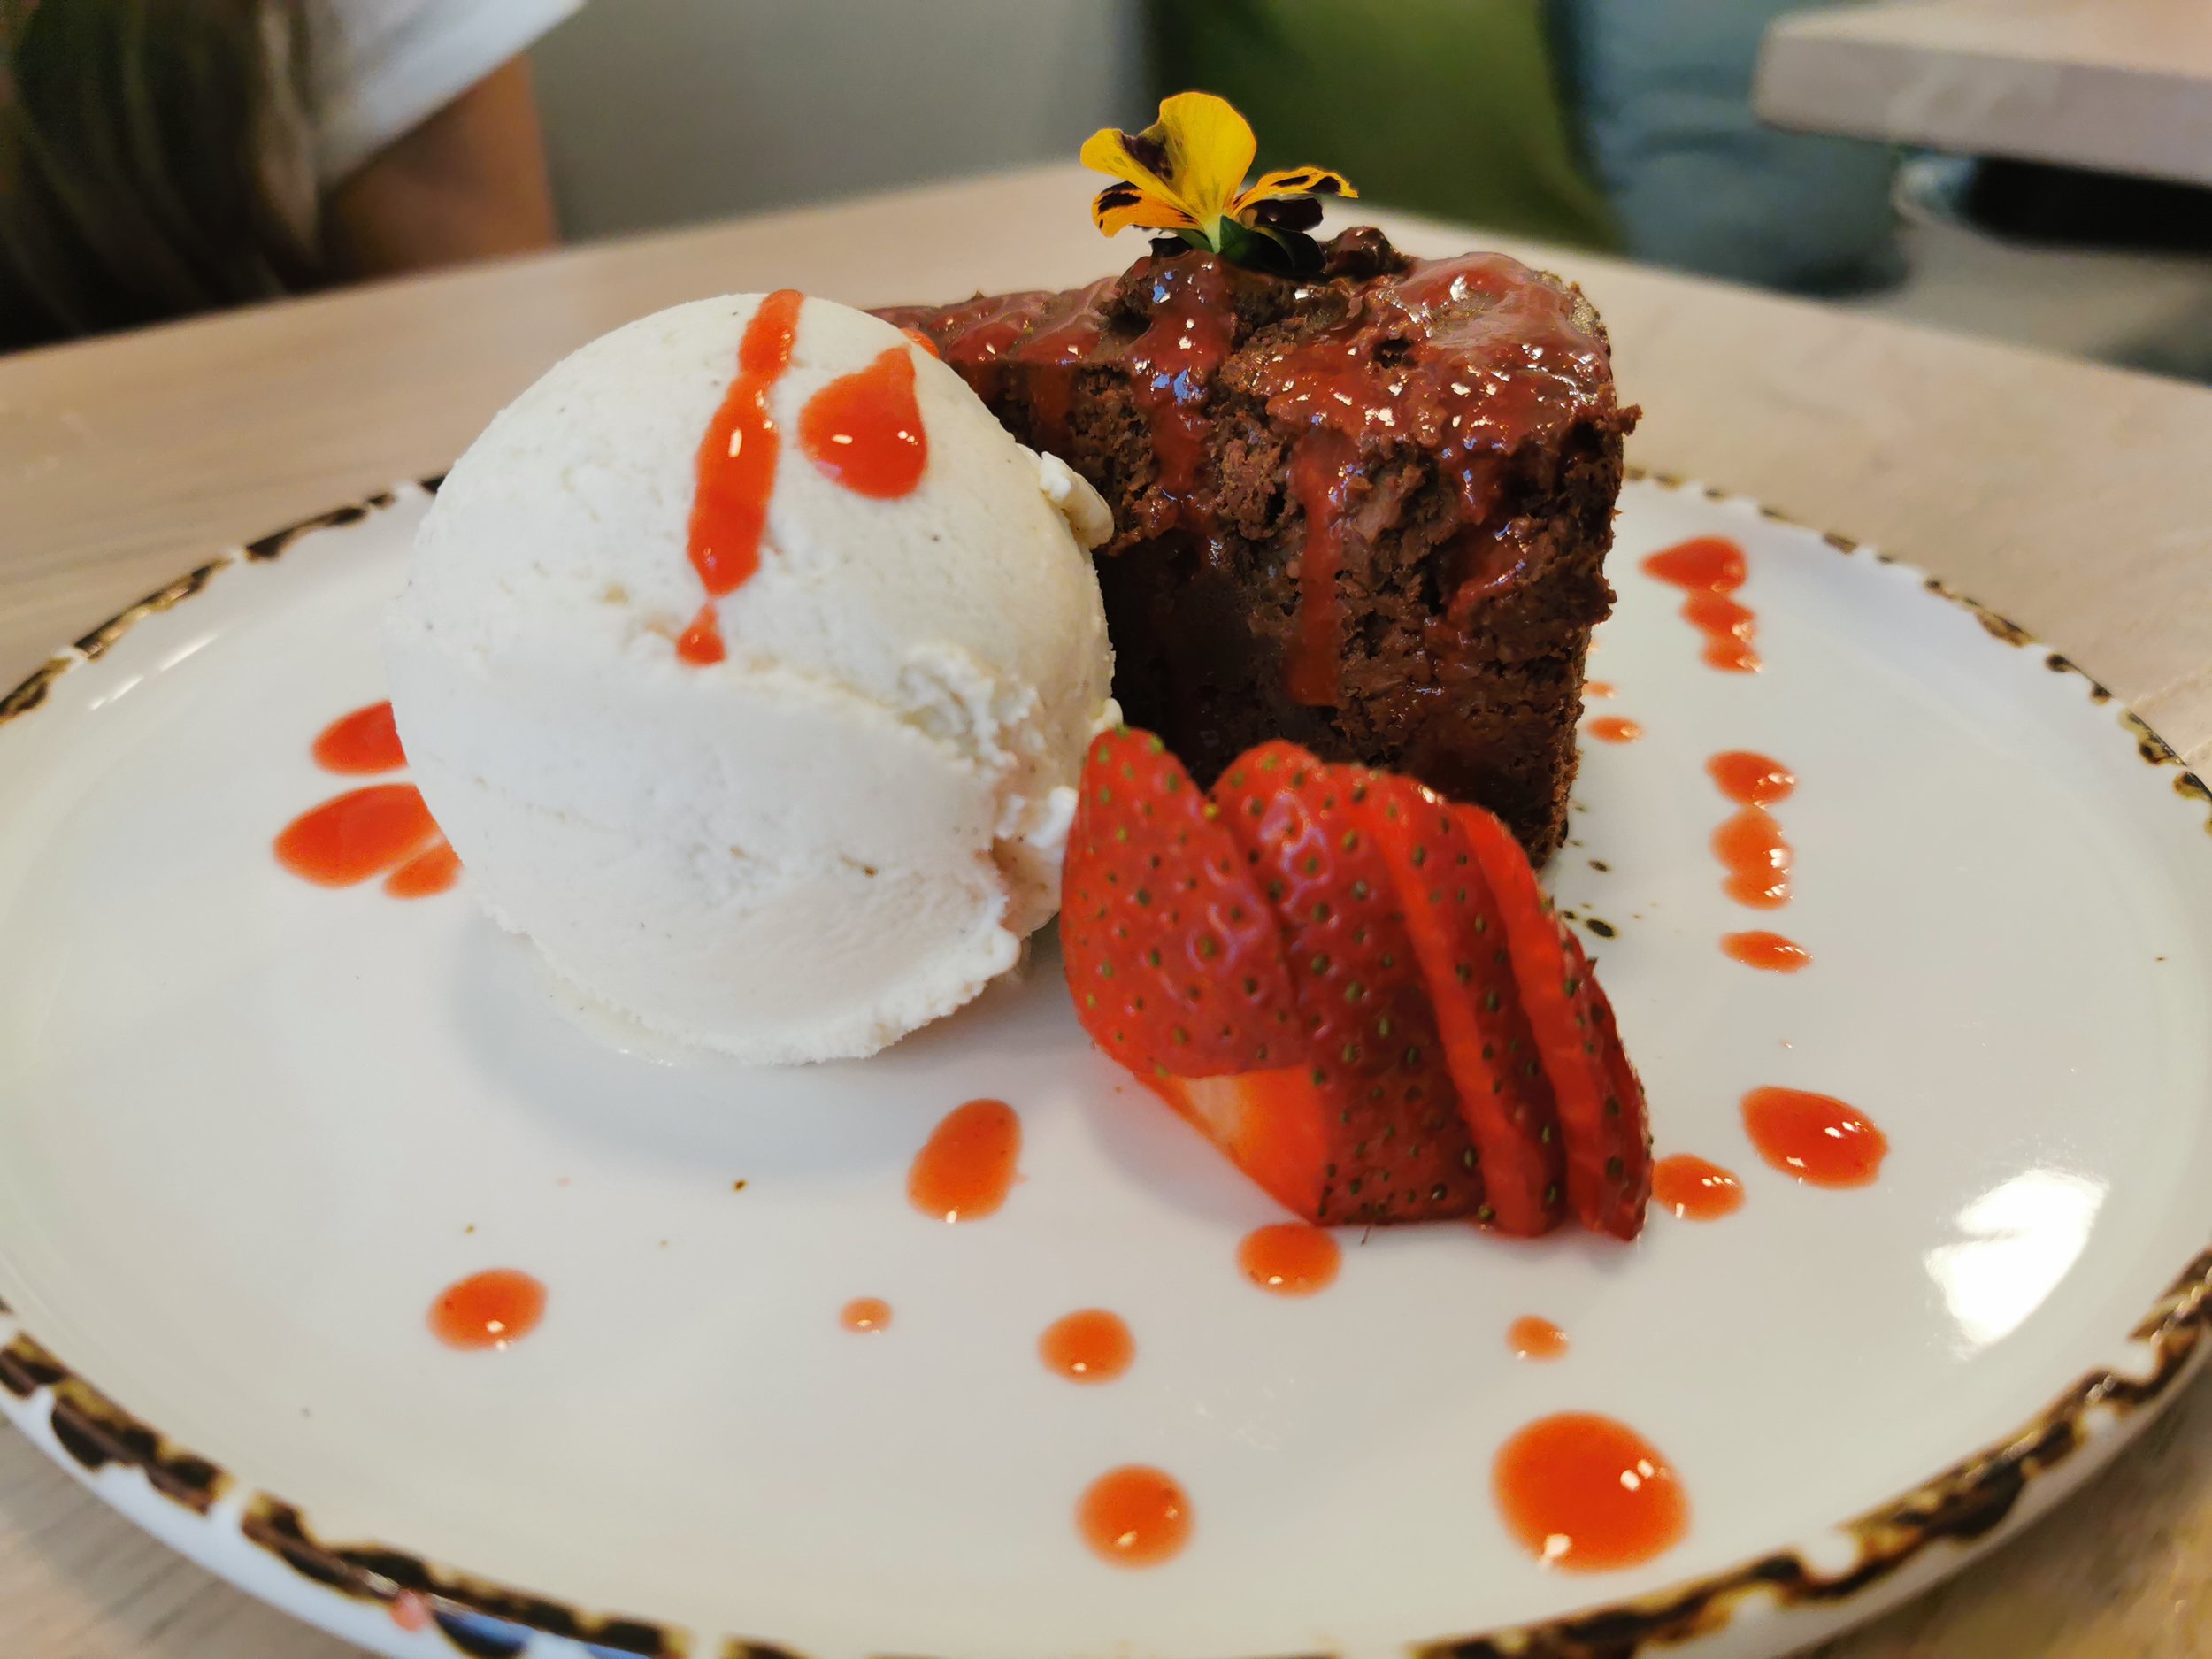 Stem + Glory: Chocolate Almond cake with strawberry coulis 